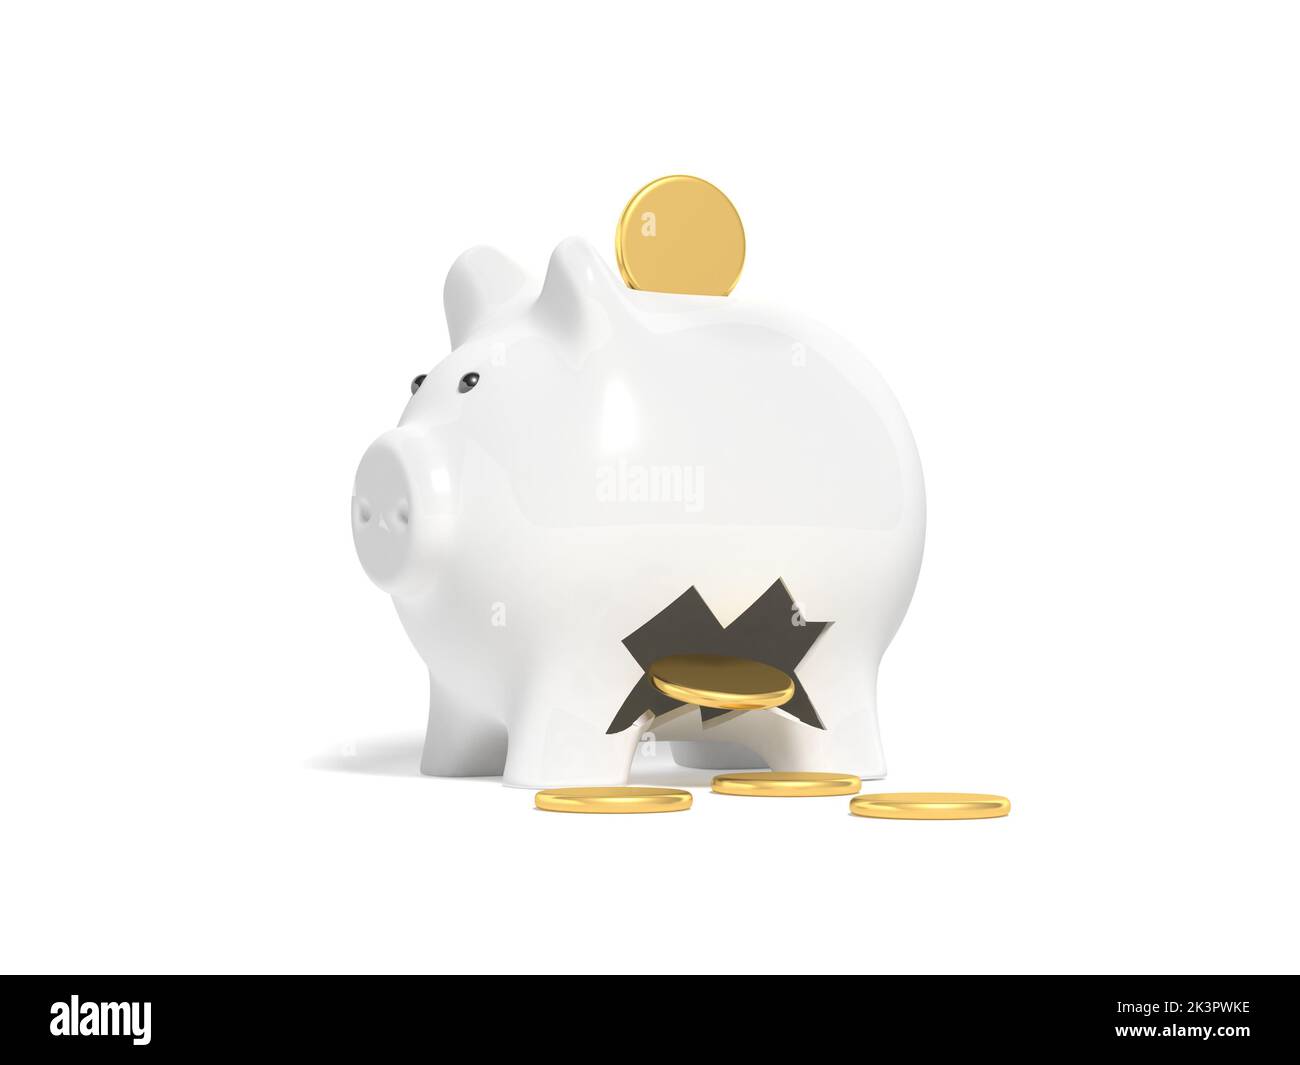 Piggy bank isolated on white background. Money leaking. Gold coins. 3d illustration. Stock Photo